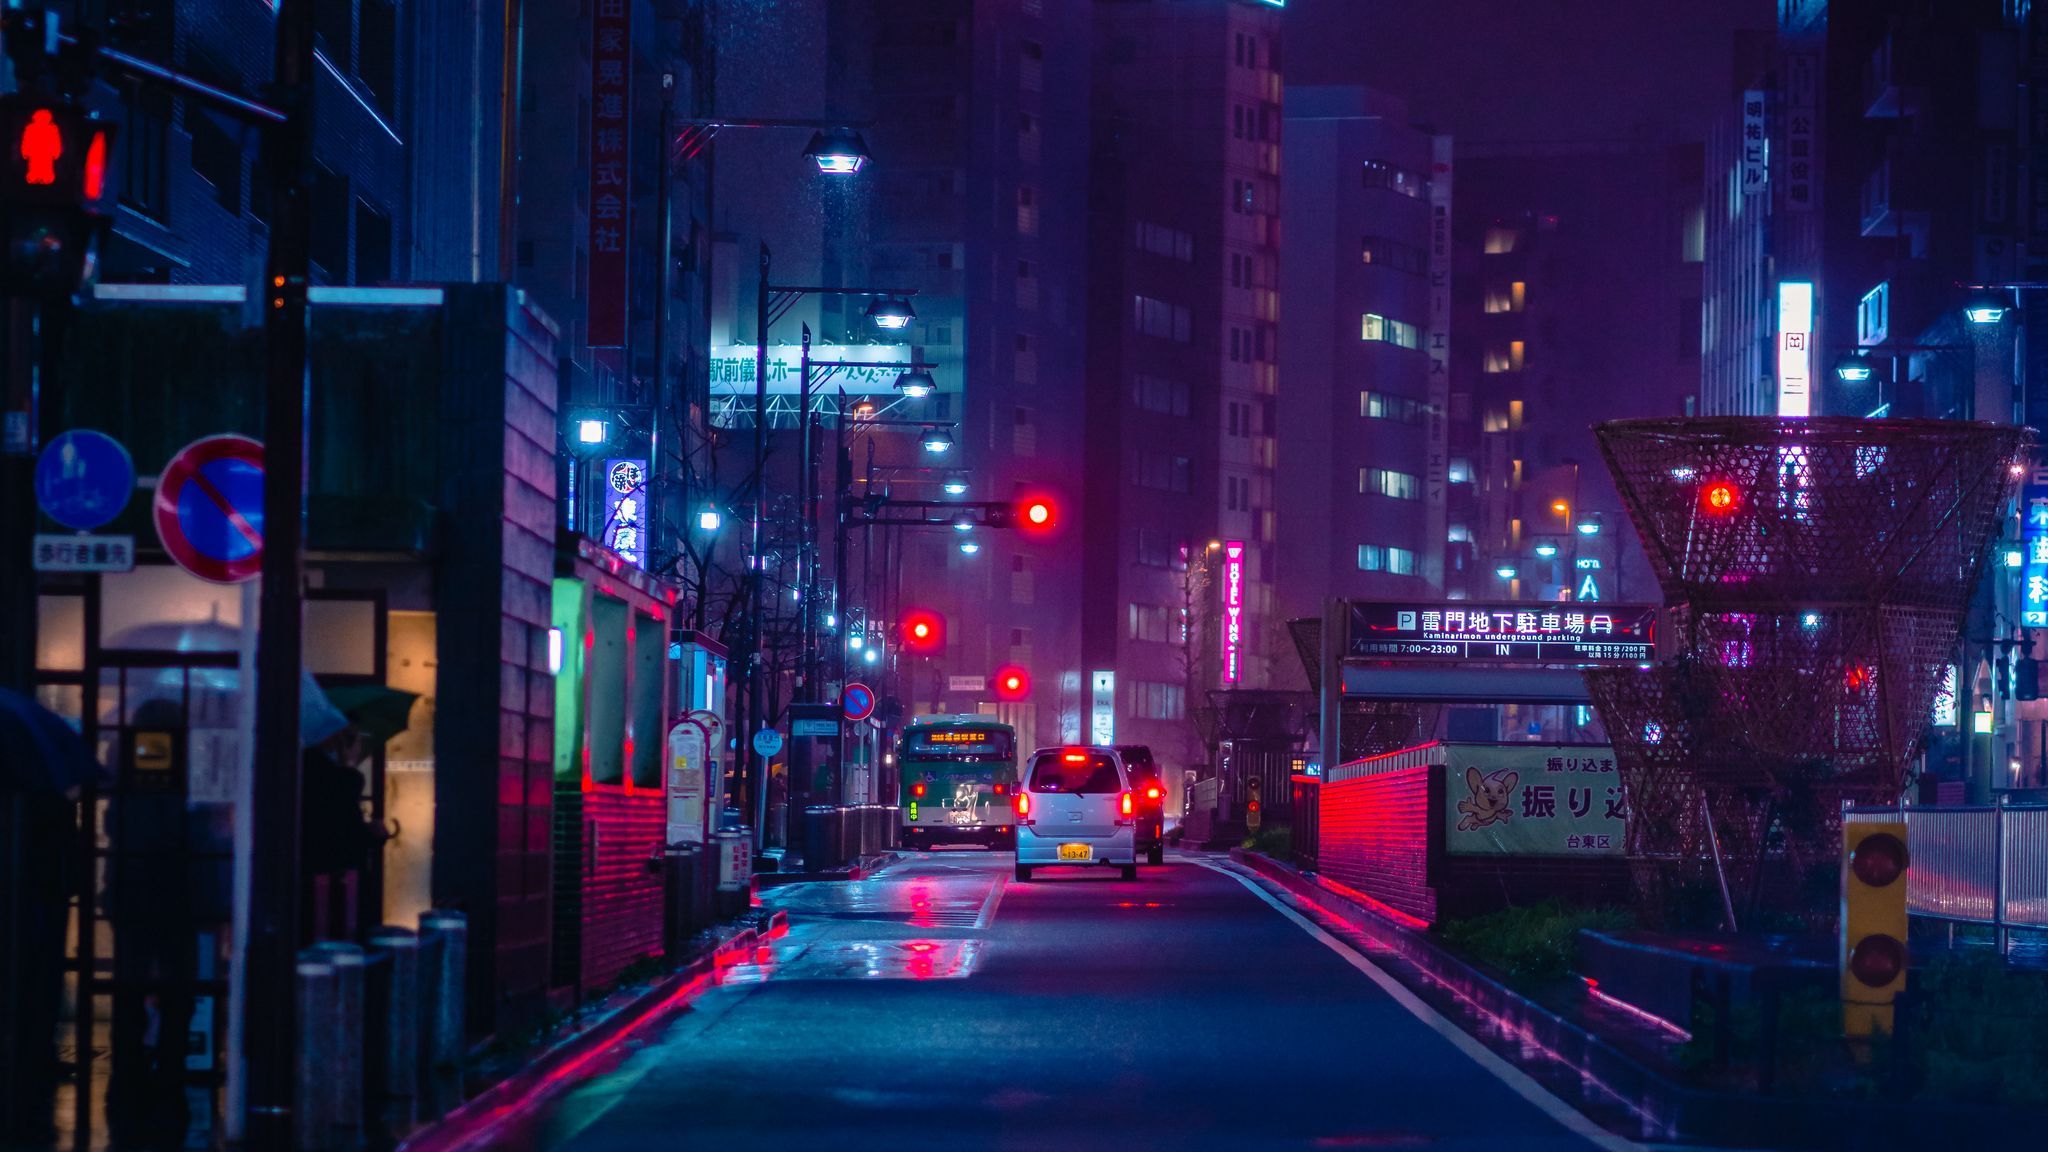 A Tokyo street at night with neon lights and a red traffic light. - Night